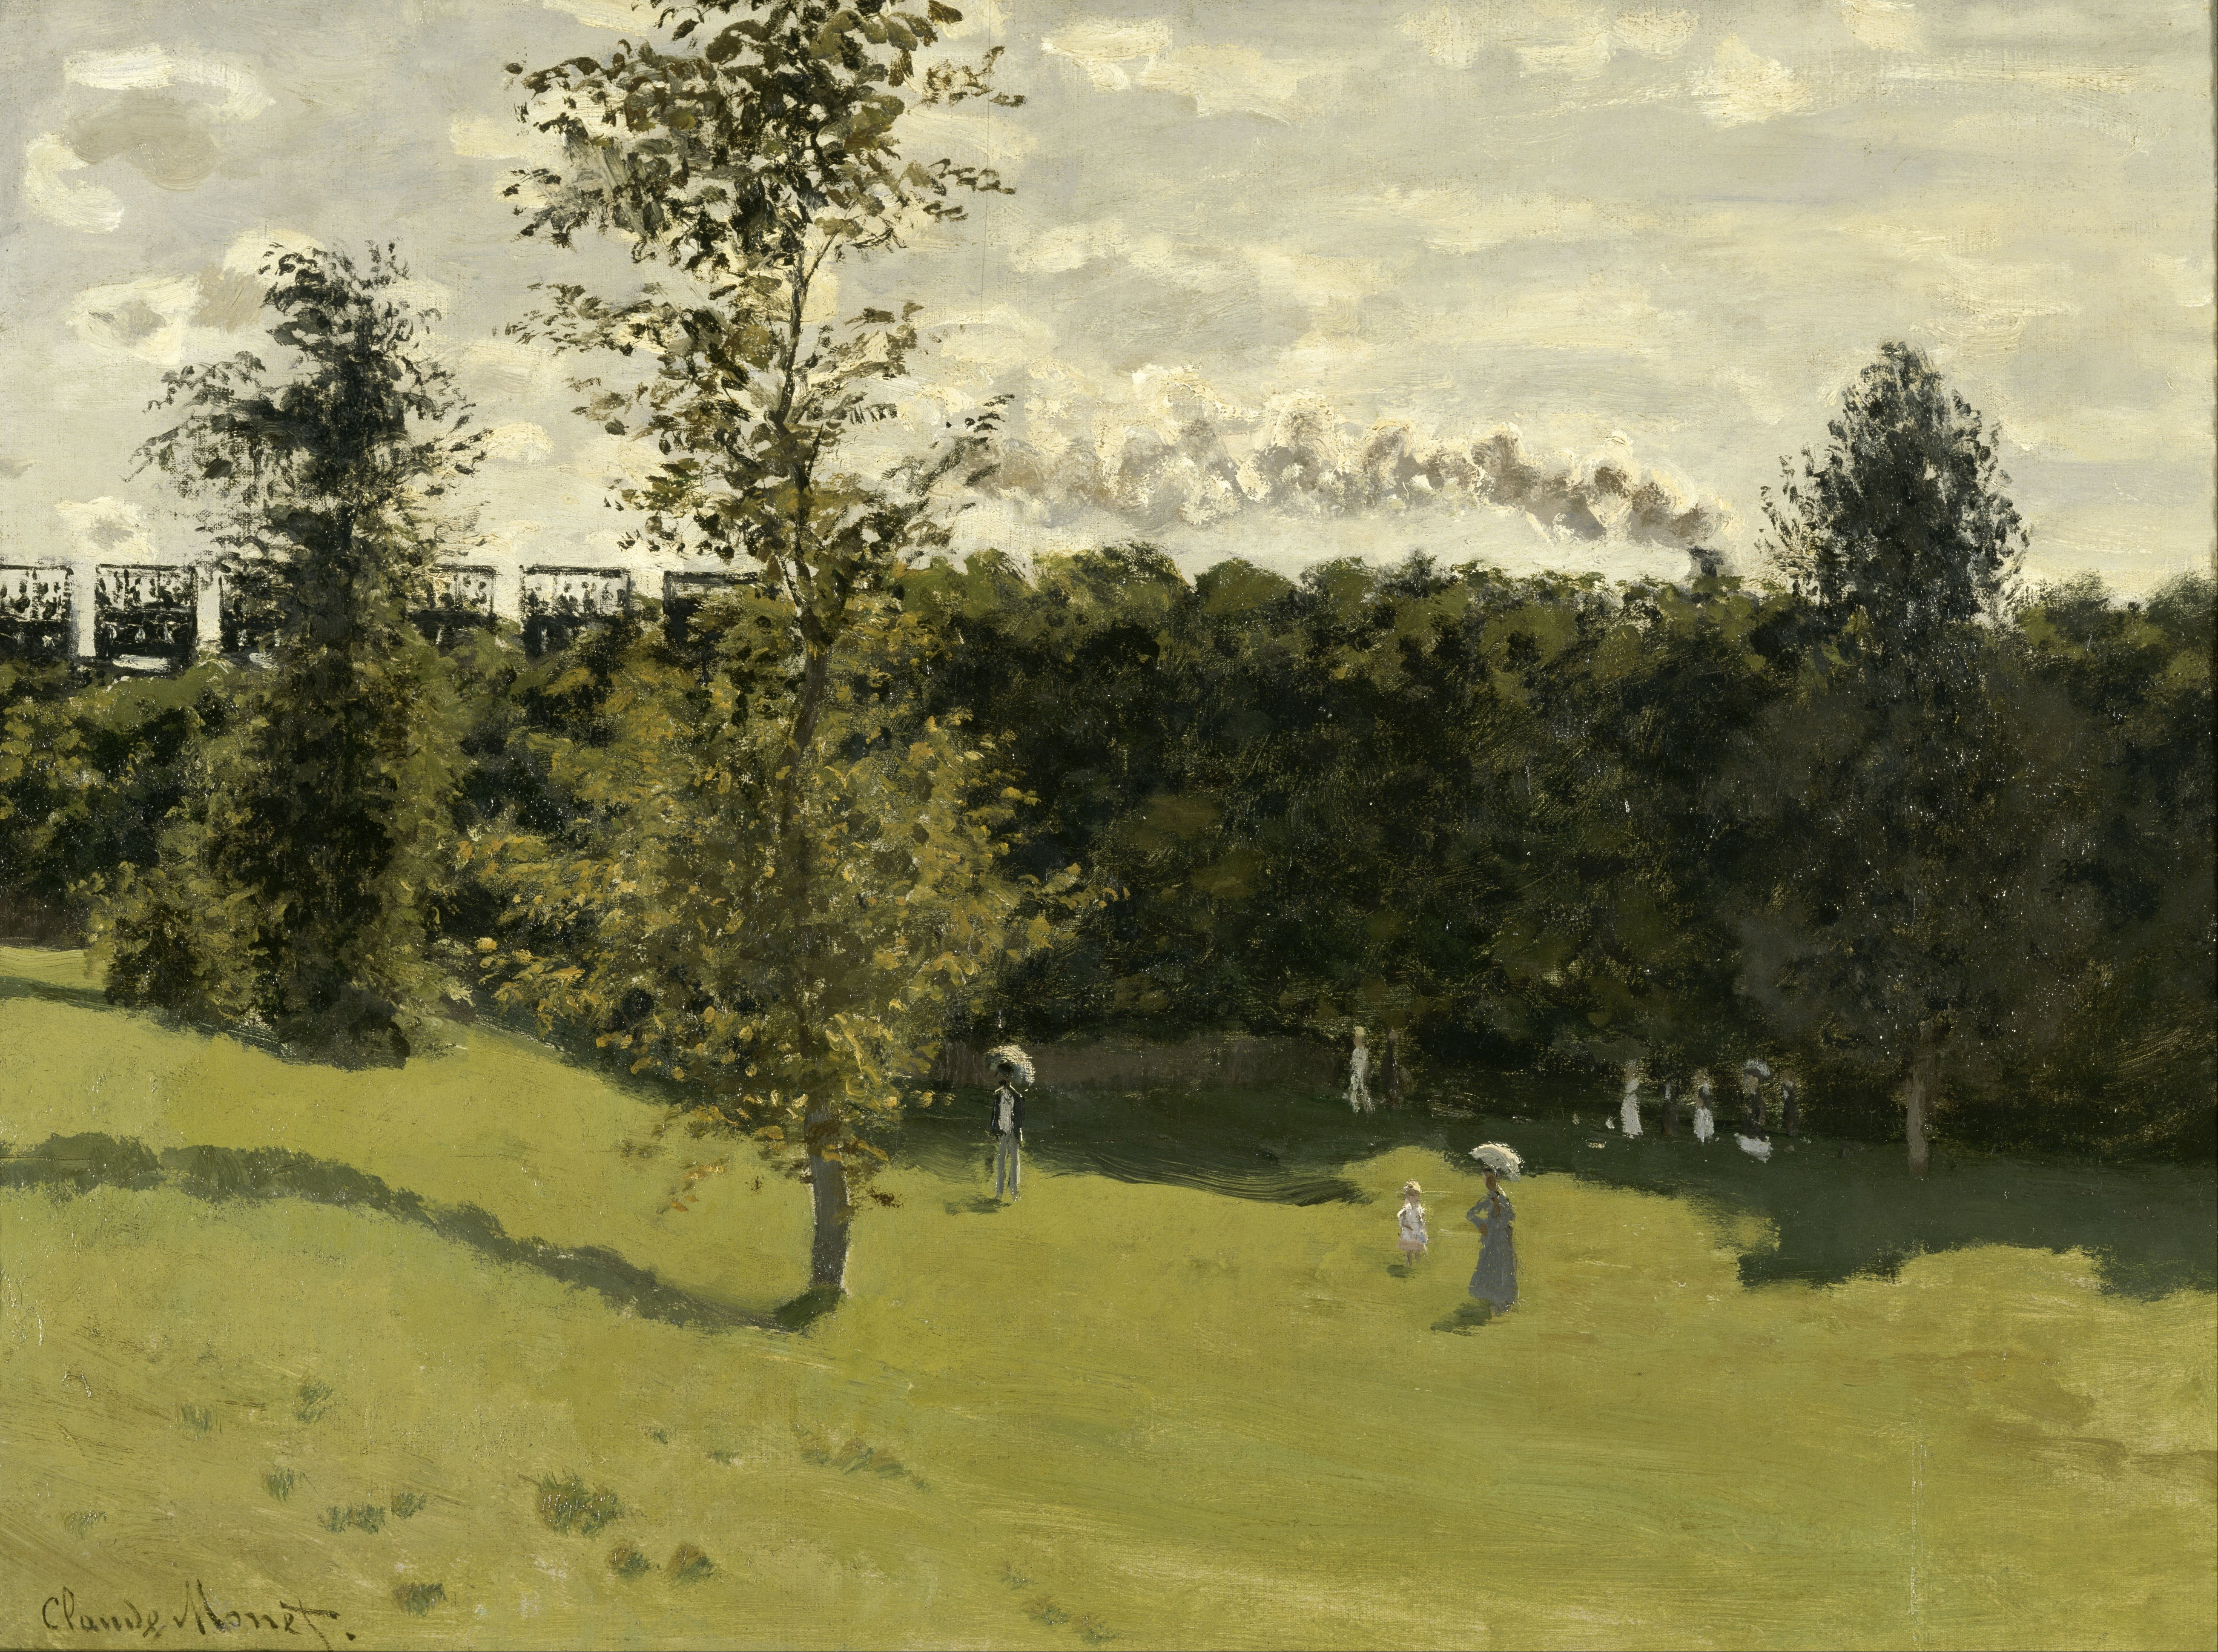 File:Claude Monet - Train in the Countryside - Google Art Project ...